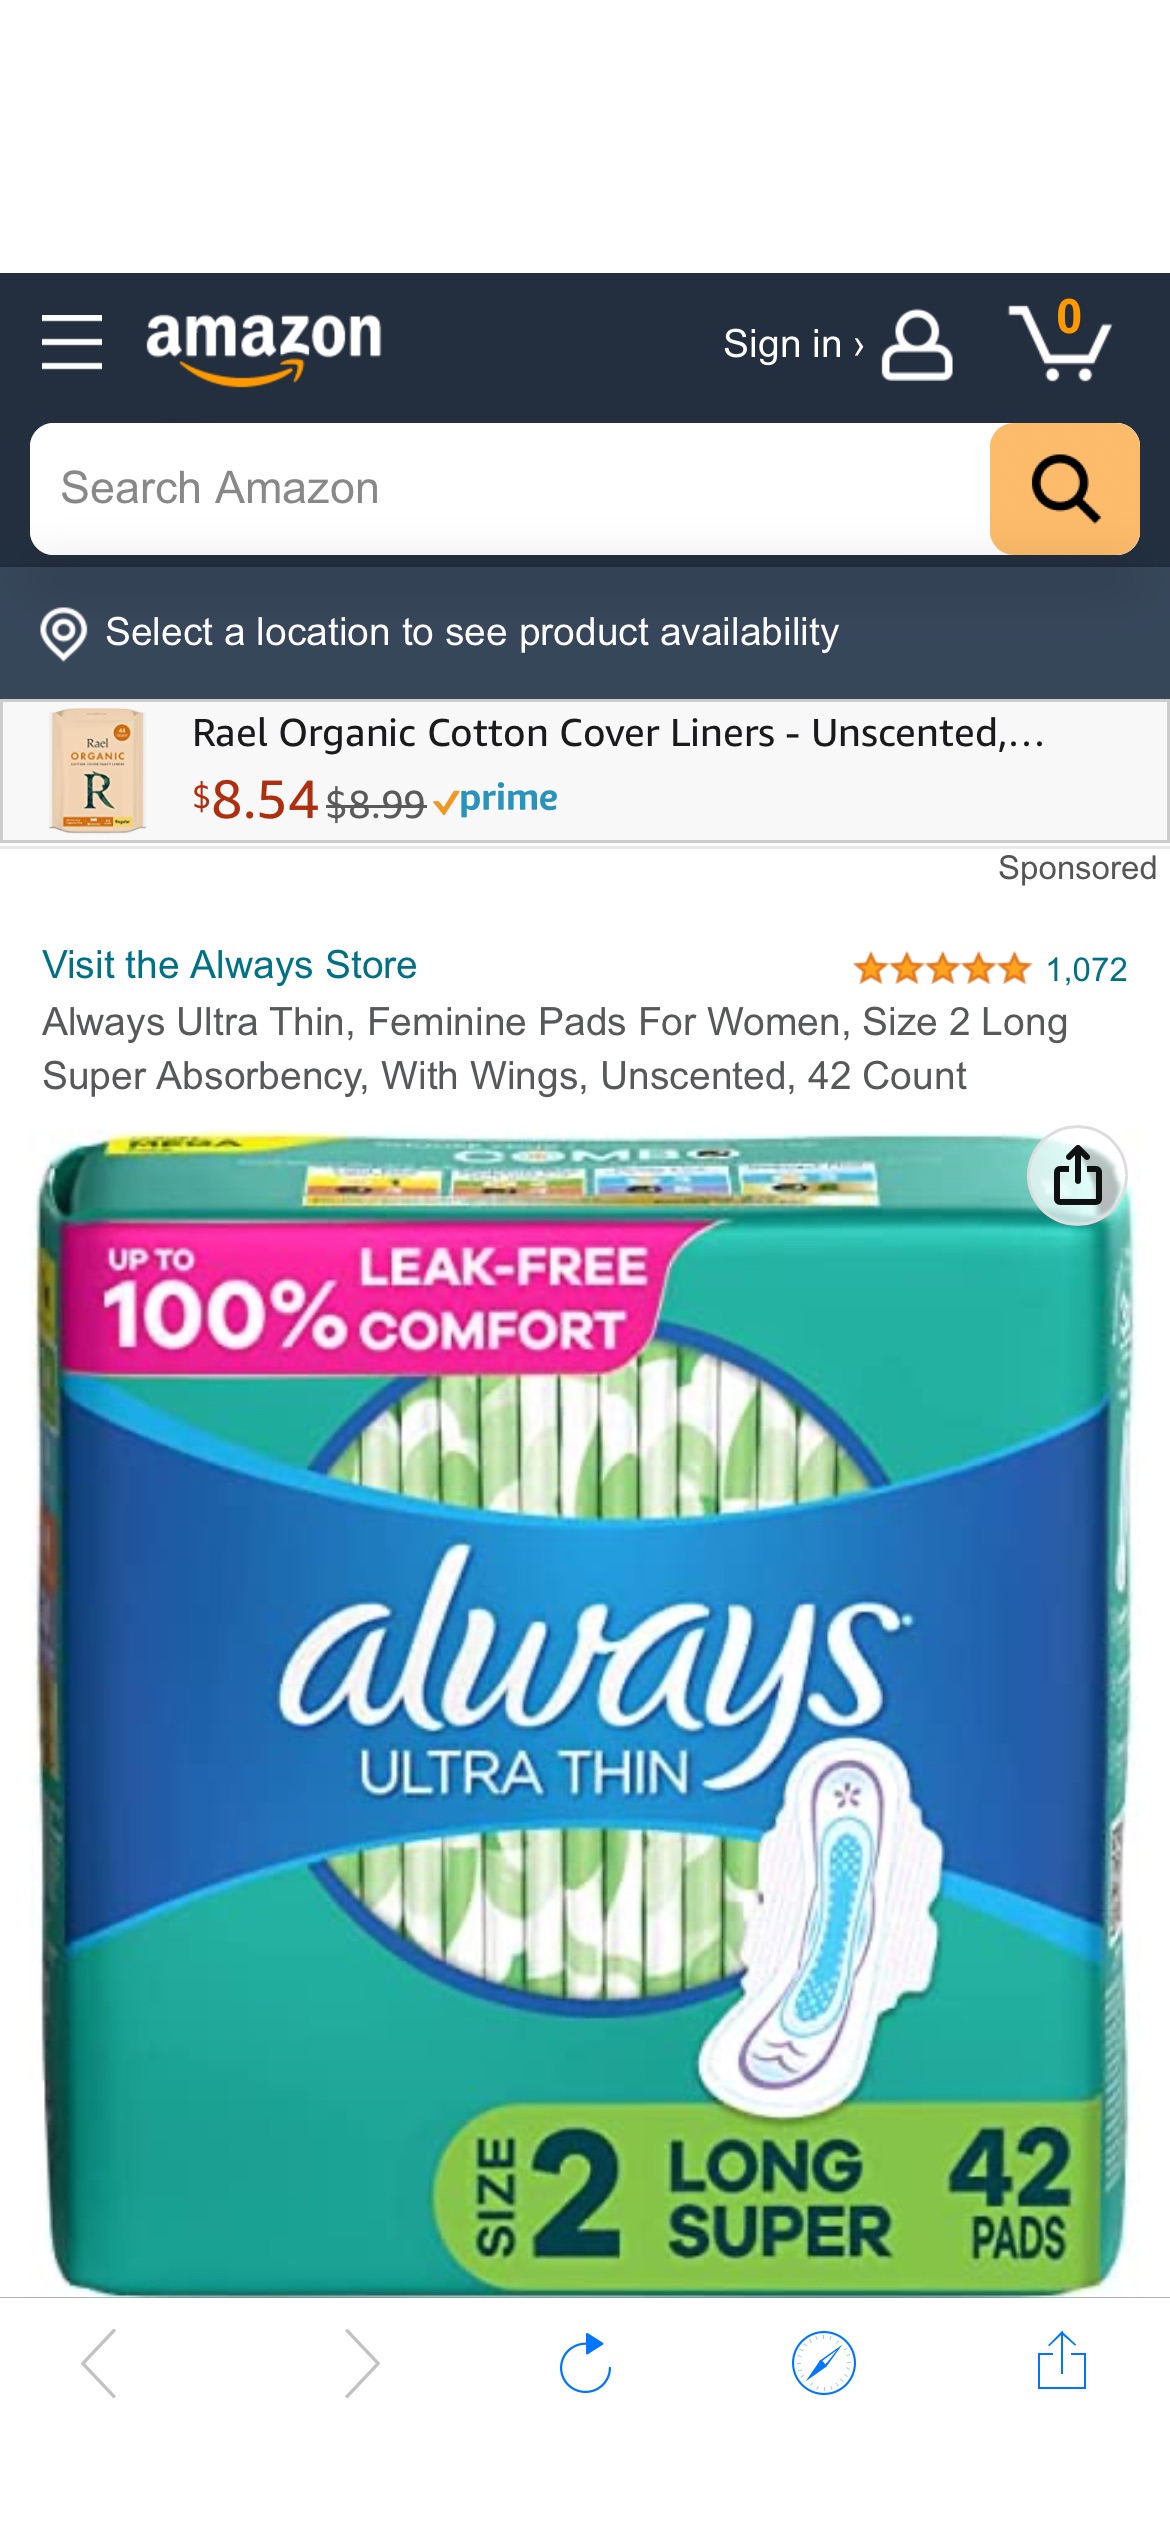 Amazon.com: Always Ultra Thin, Feminine Pads For Women, Size 2 Long Super Absorbency, With Wings, Unscented, 42 Count : Health & Household